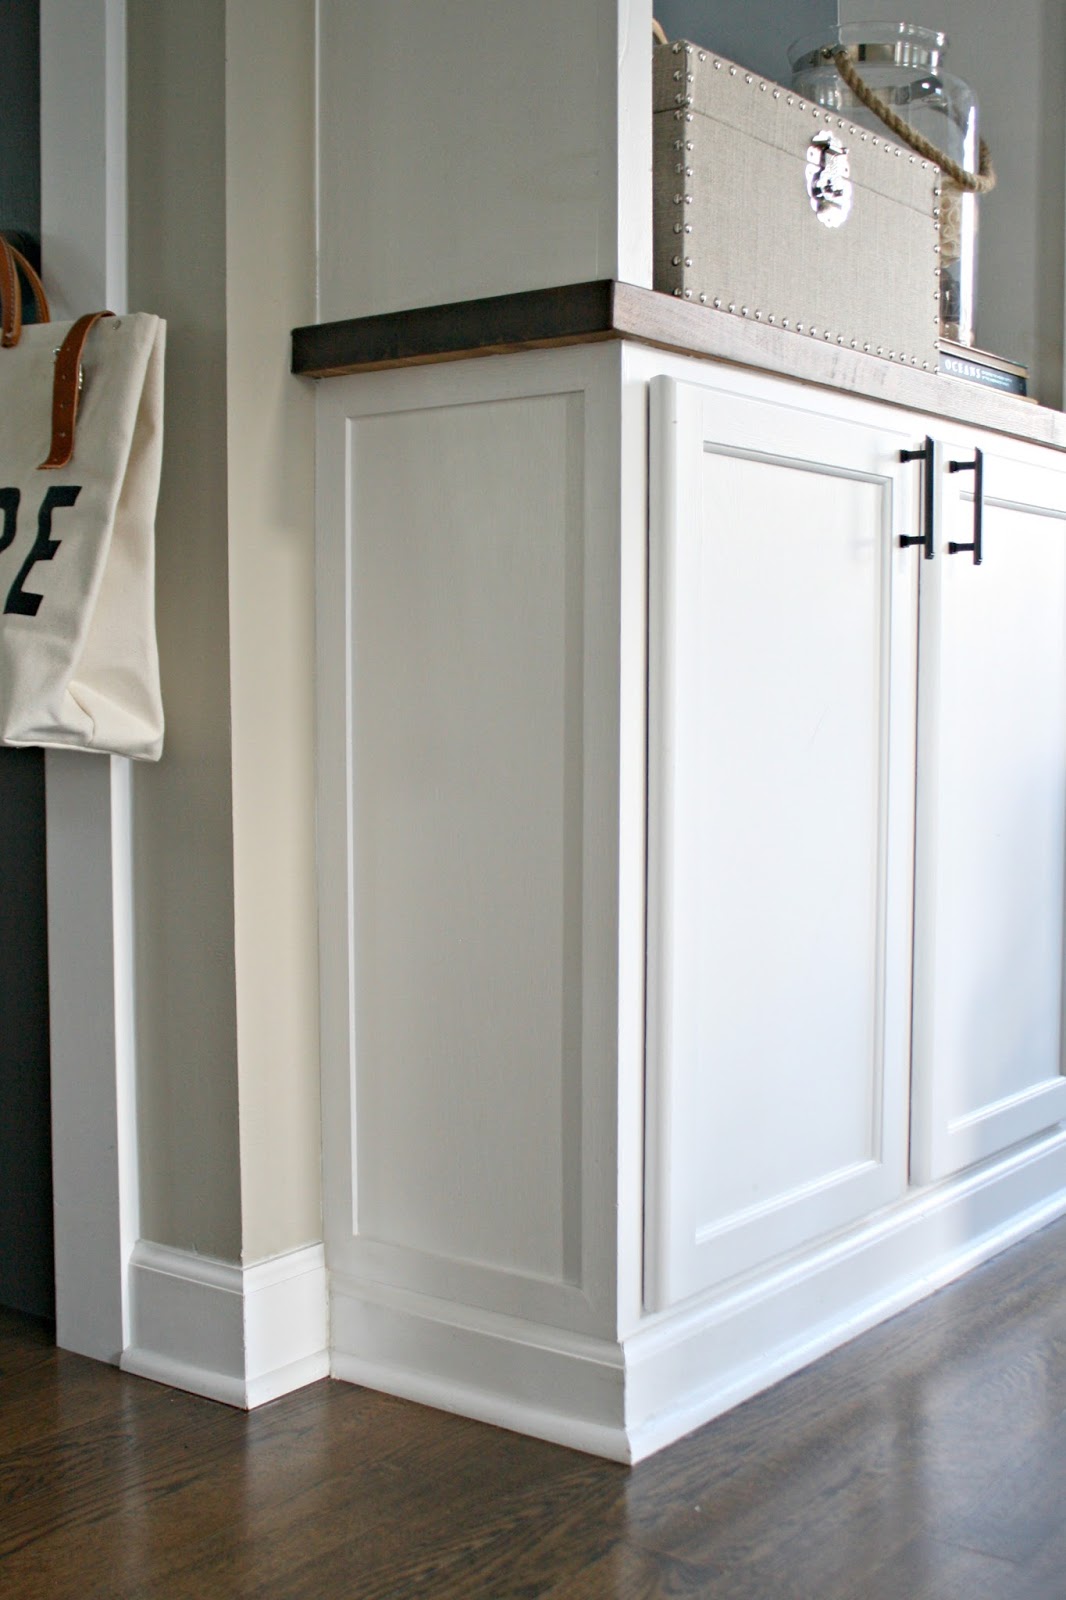 How To Create Custom Built Ins With Kitchen Cabinets From Thrifty